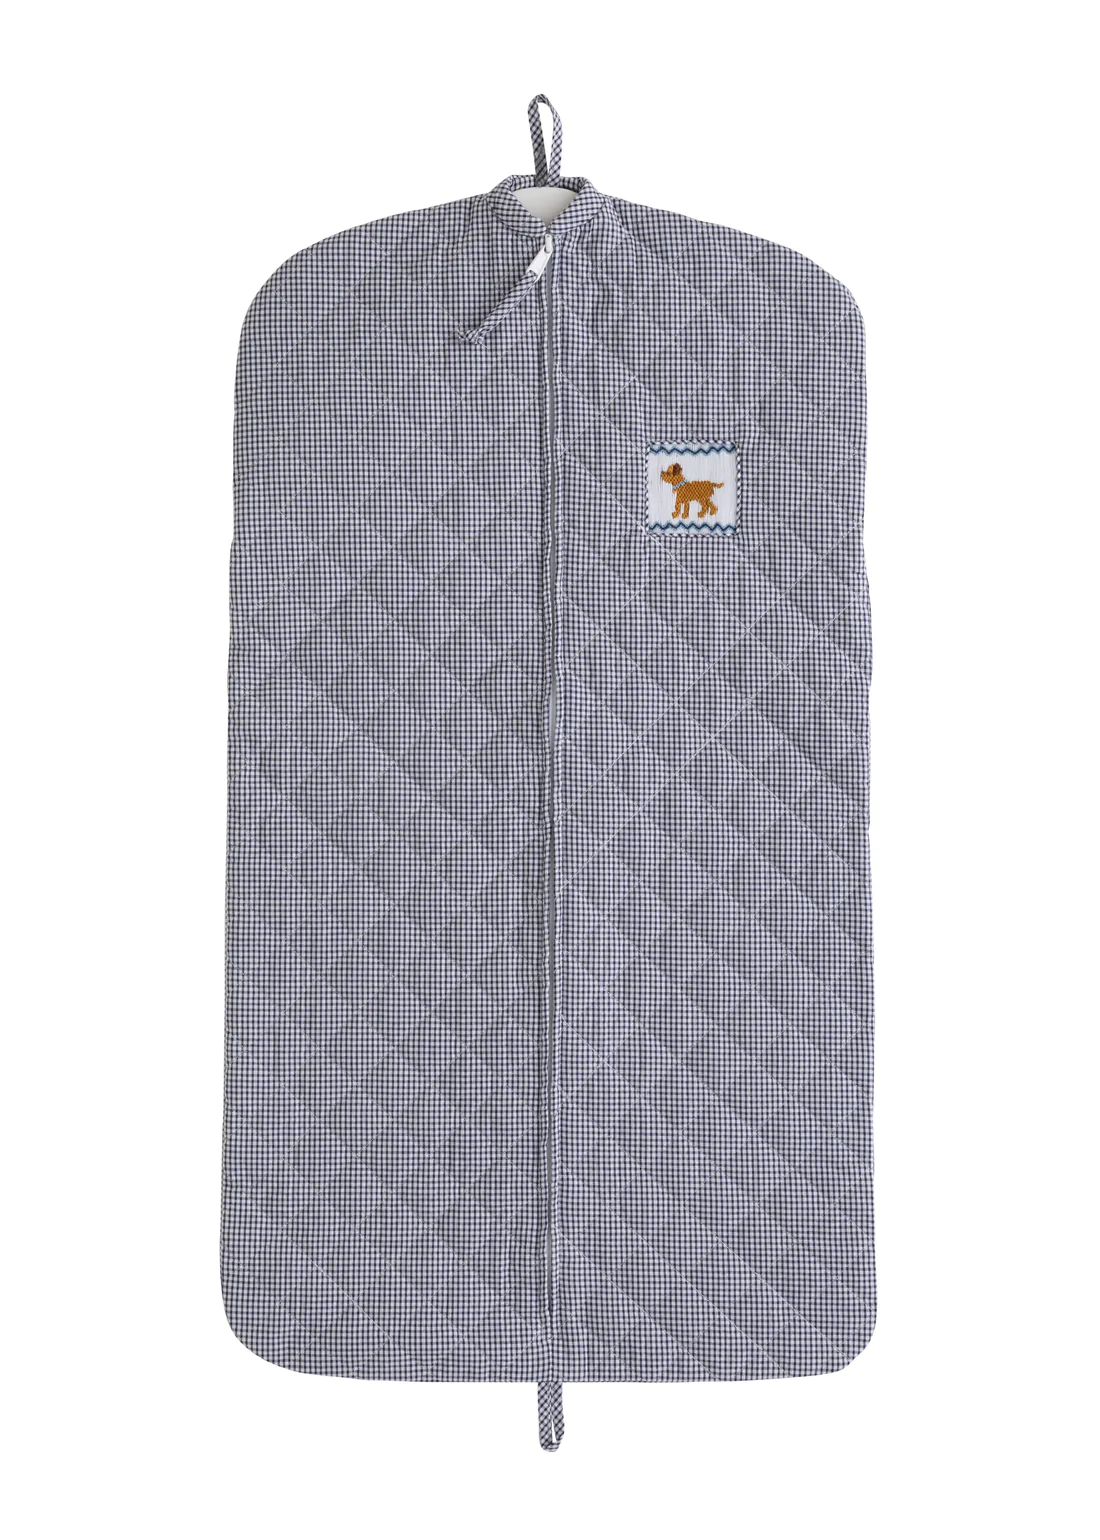 Quilted Garment Bag